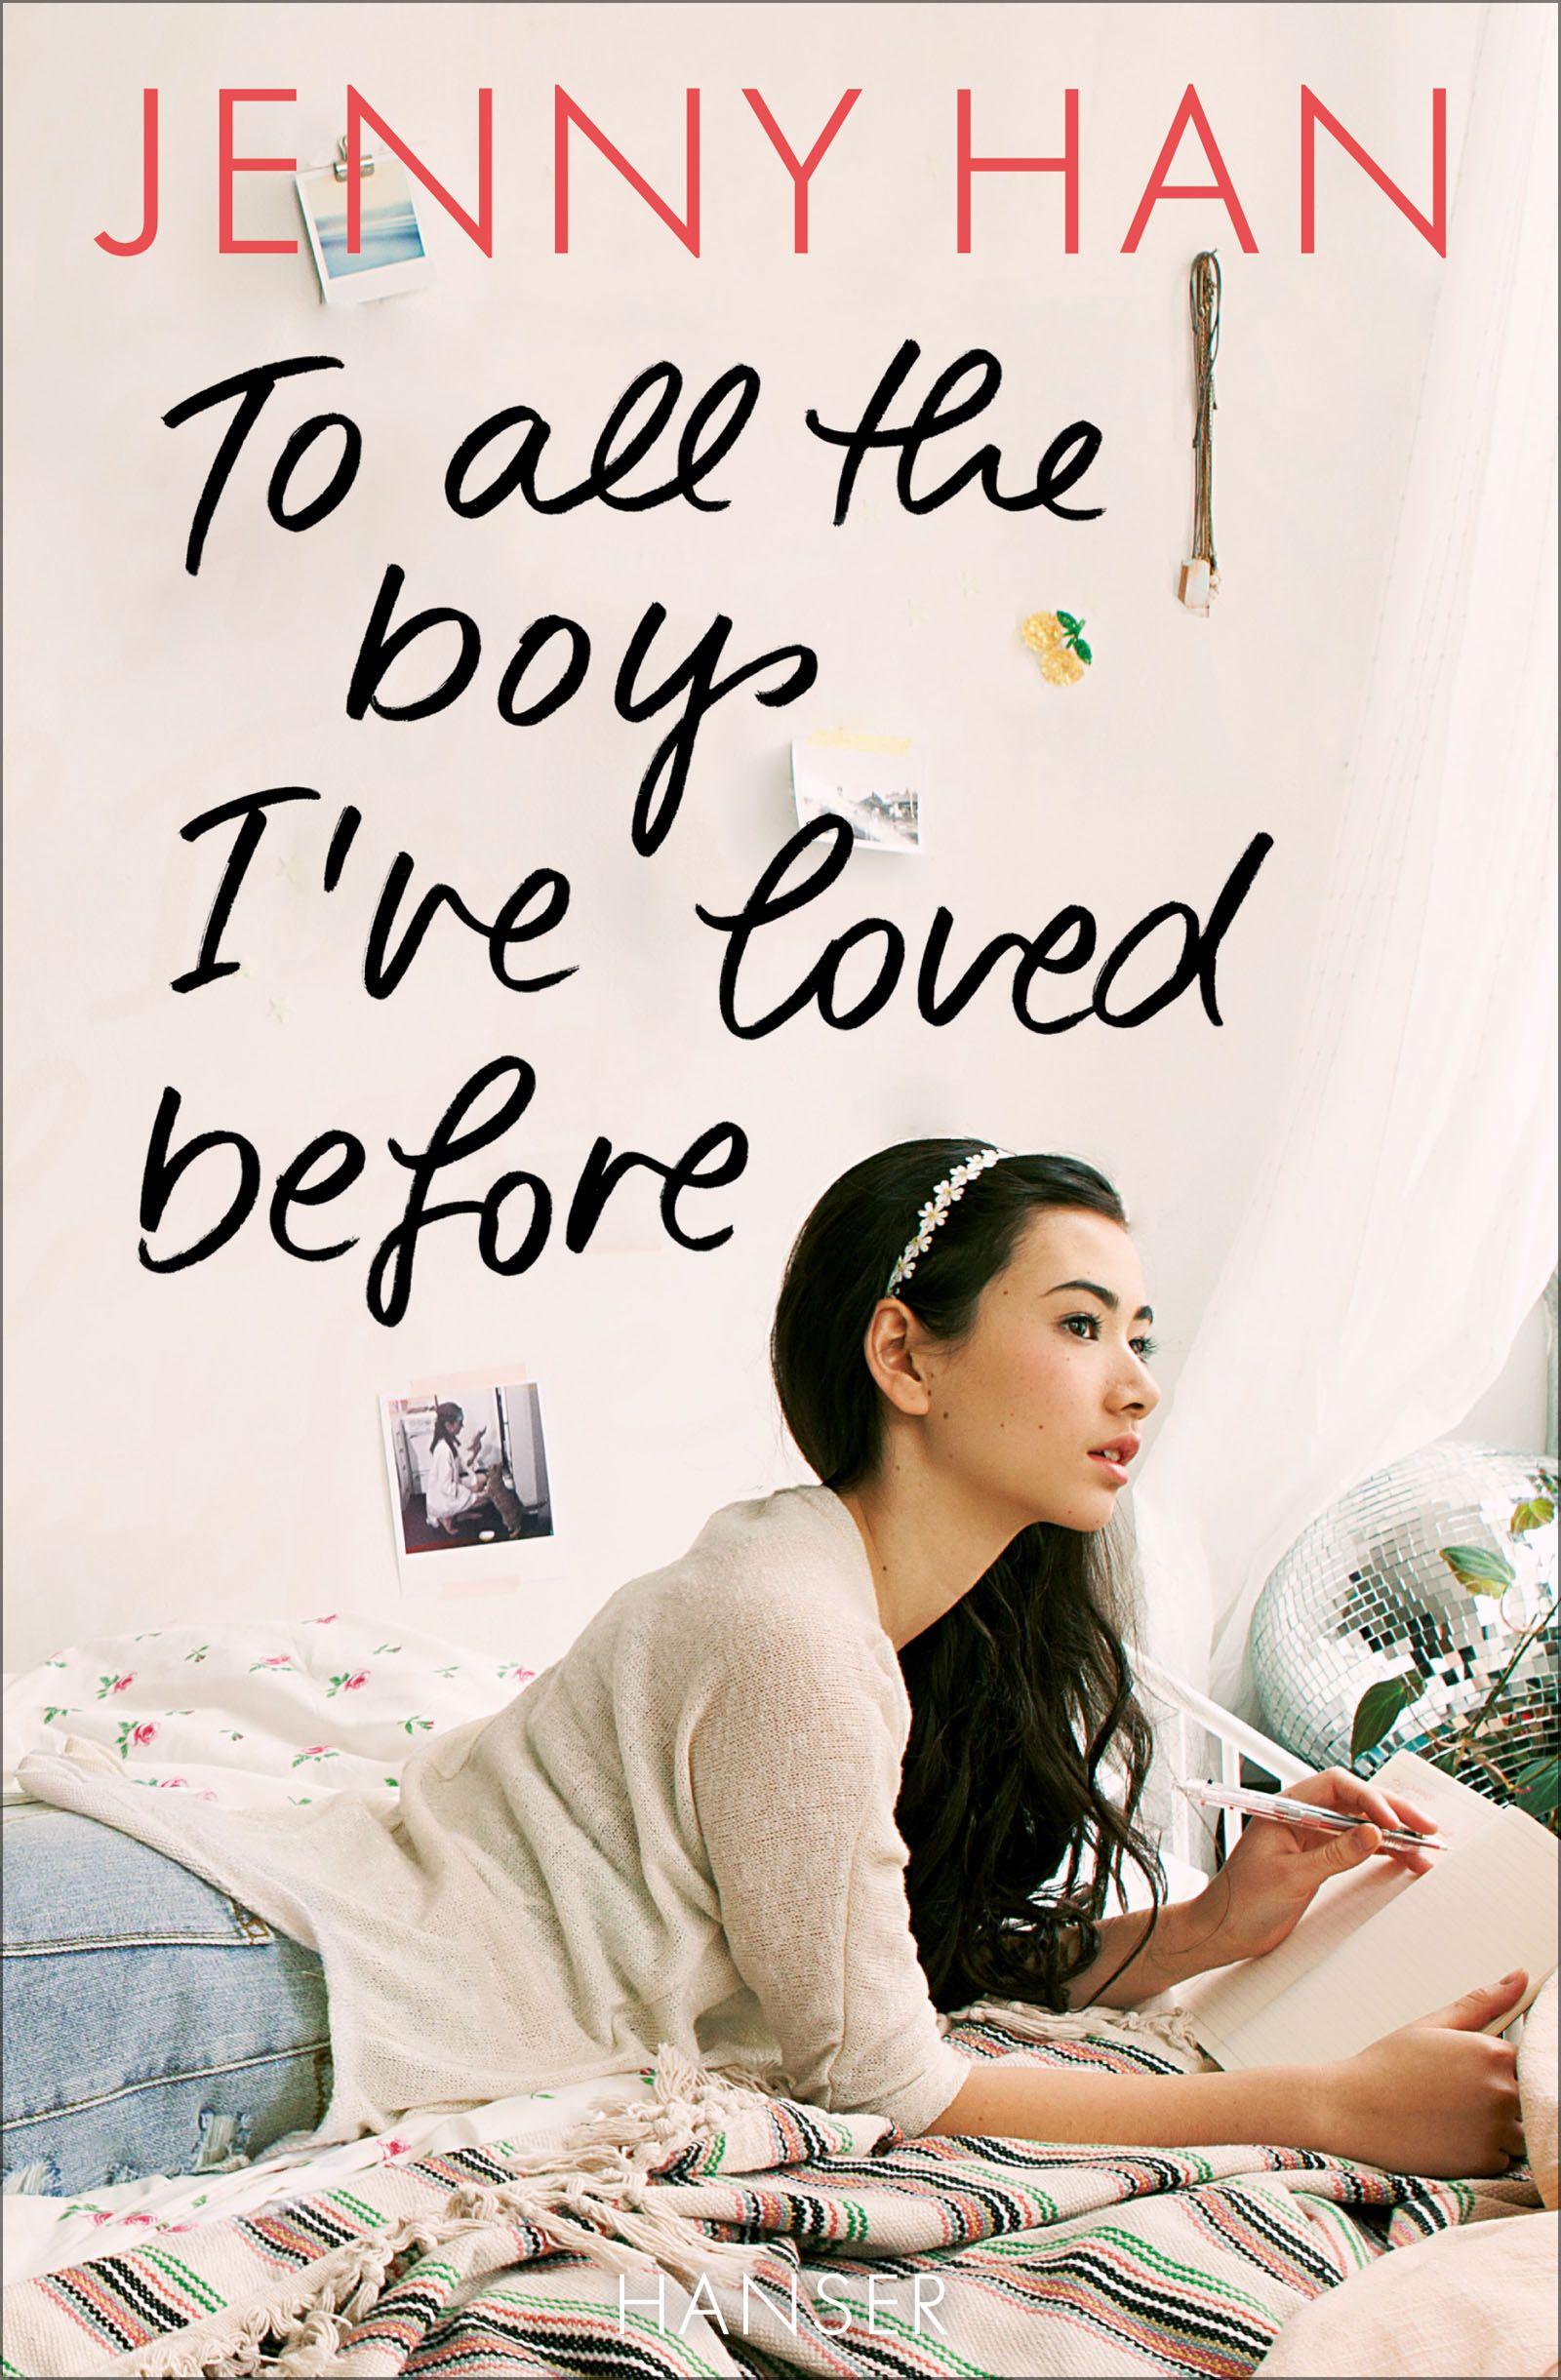 Which 'To All the Boys I've Loved Before' Character are you?